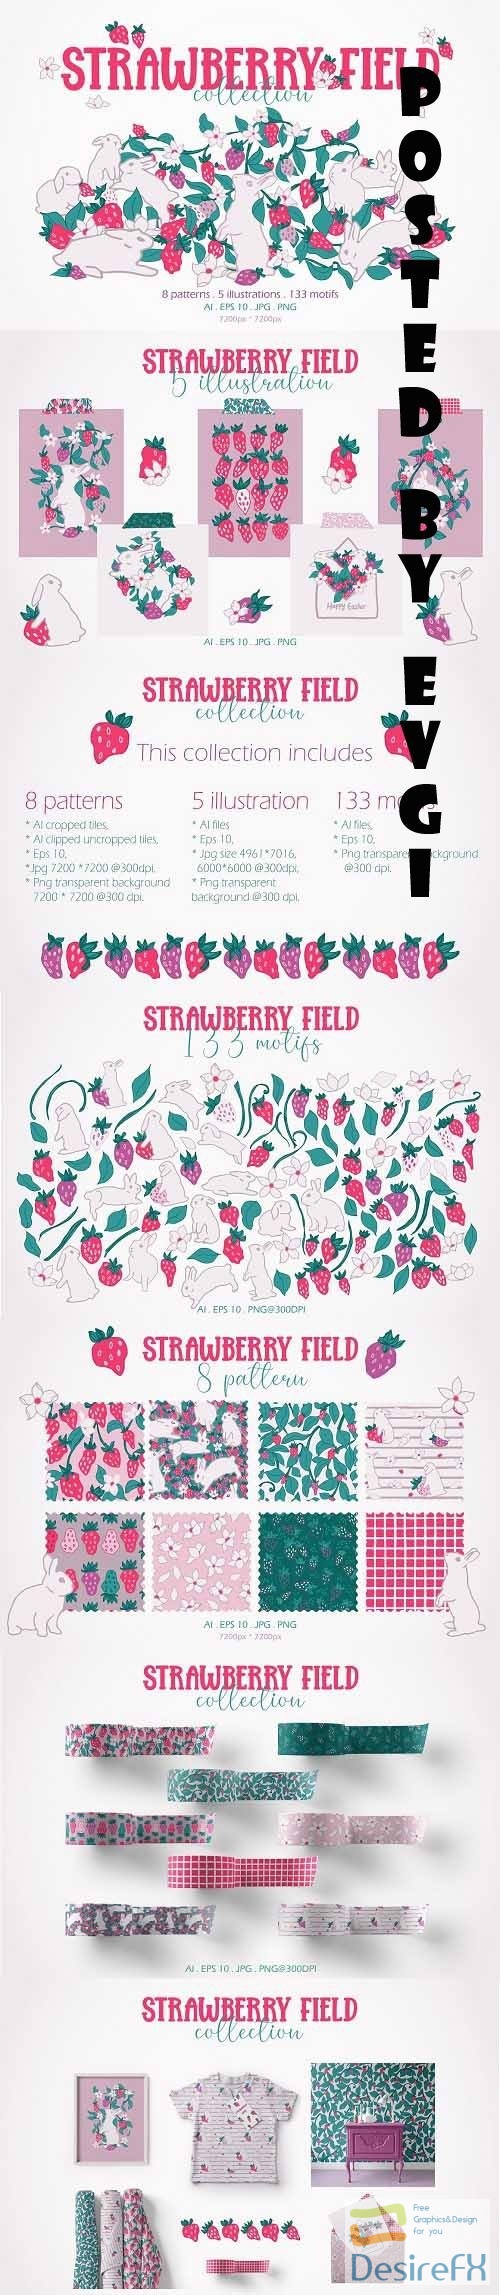 Strawberry Field Collection - 7083412